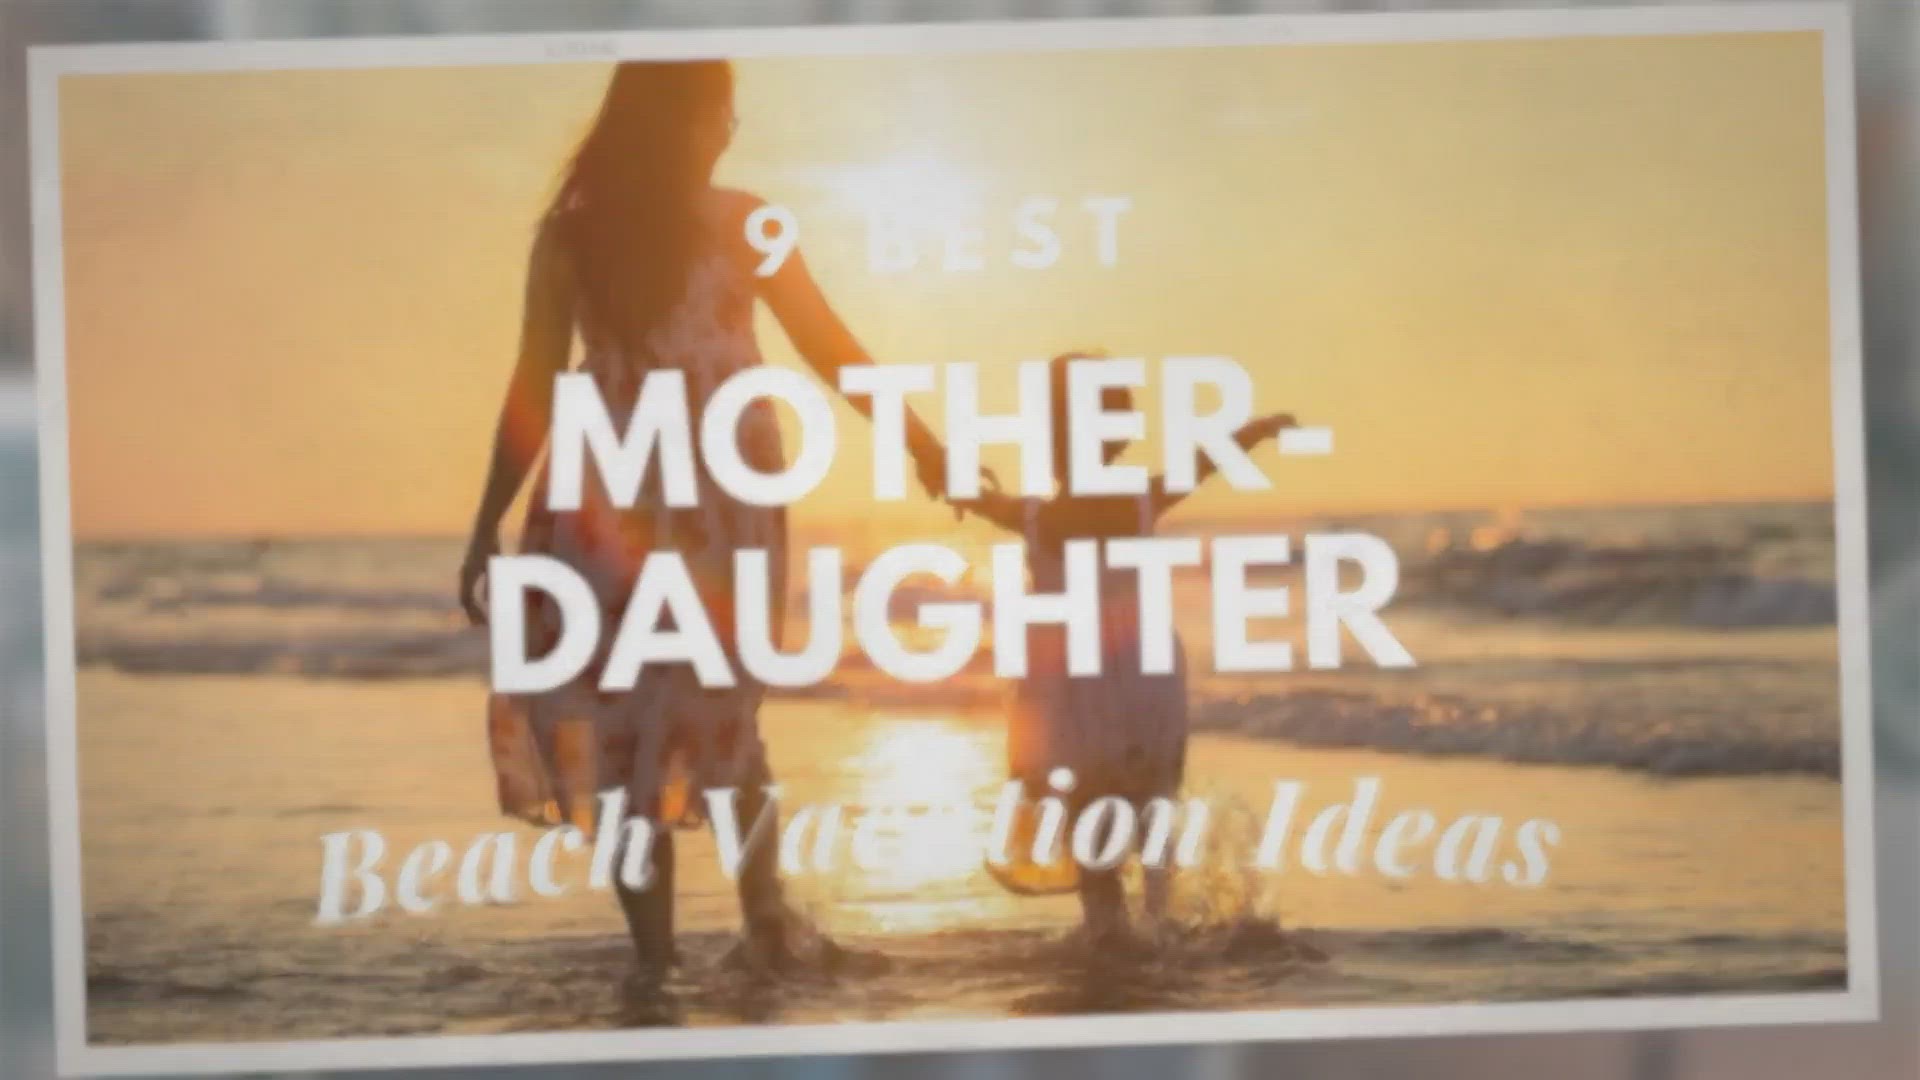 'Video thumbnail for [9 Best] Mother-daughter Beach Vacation Ideas'